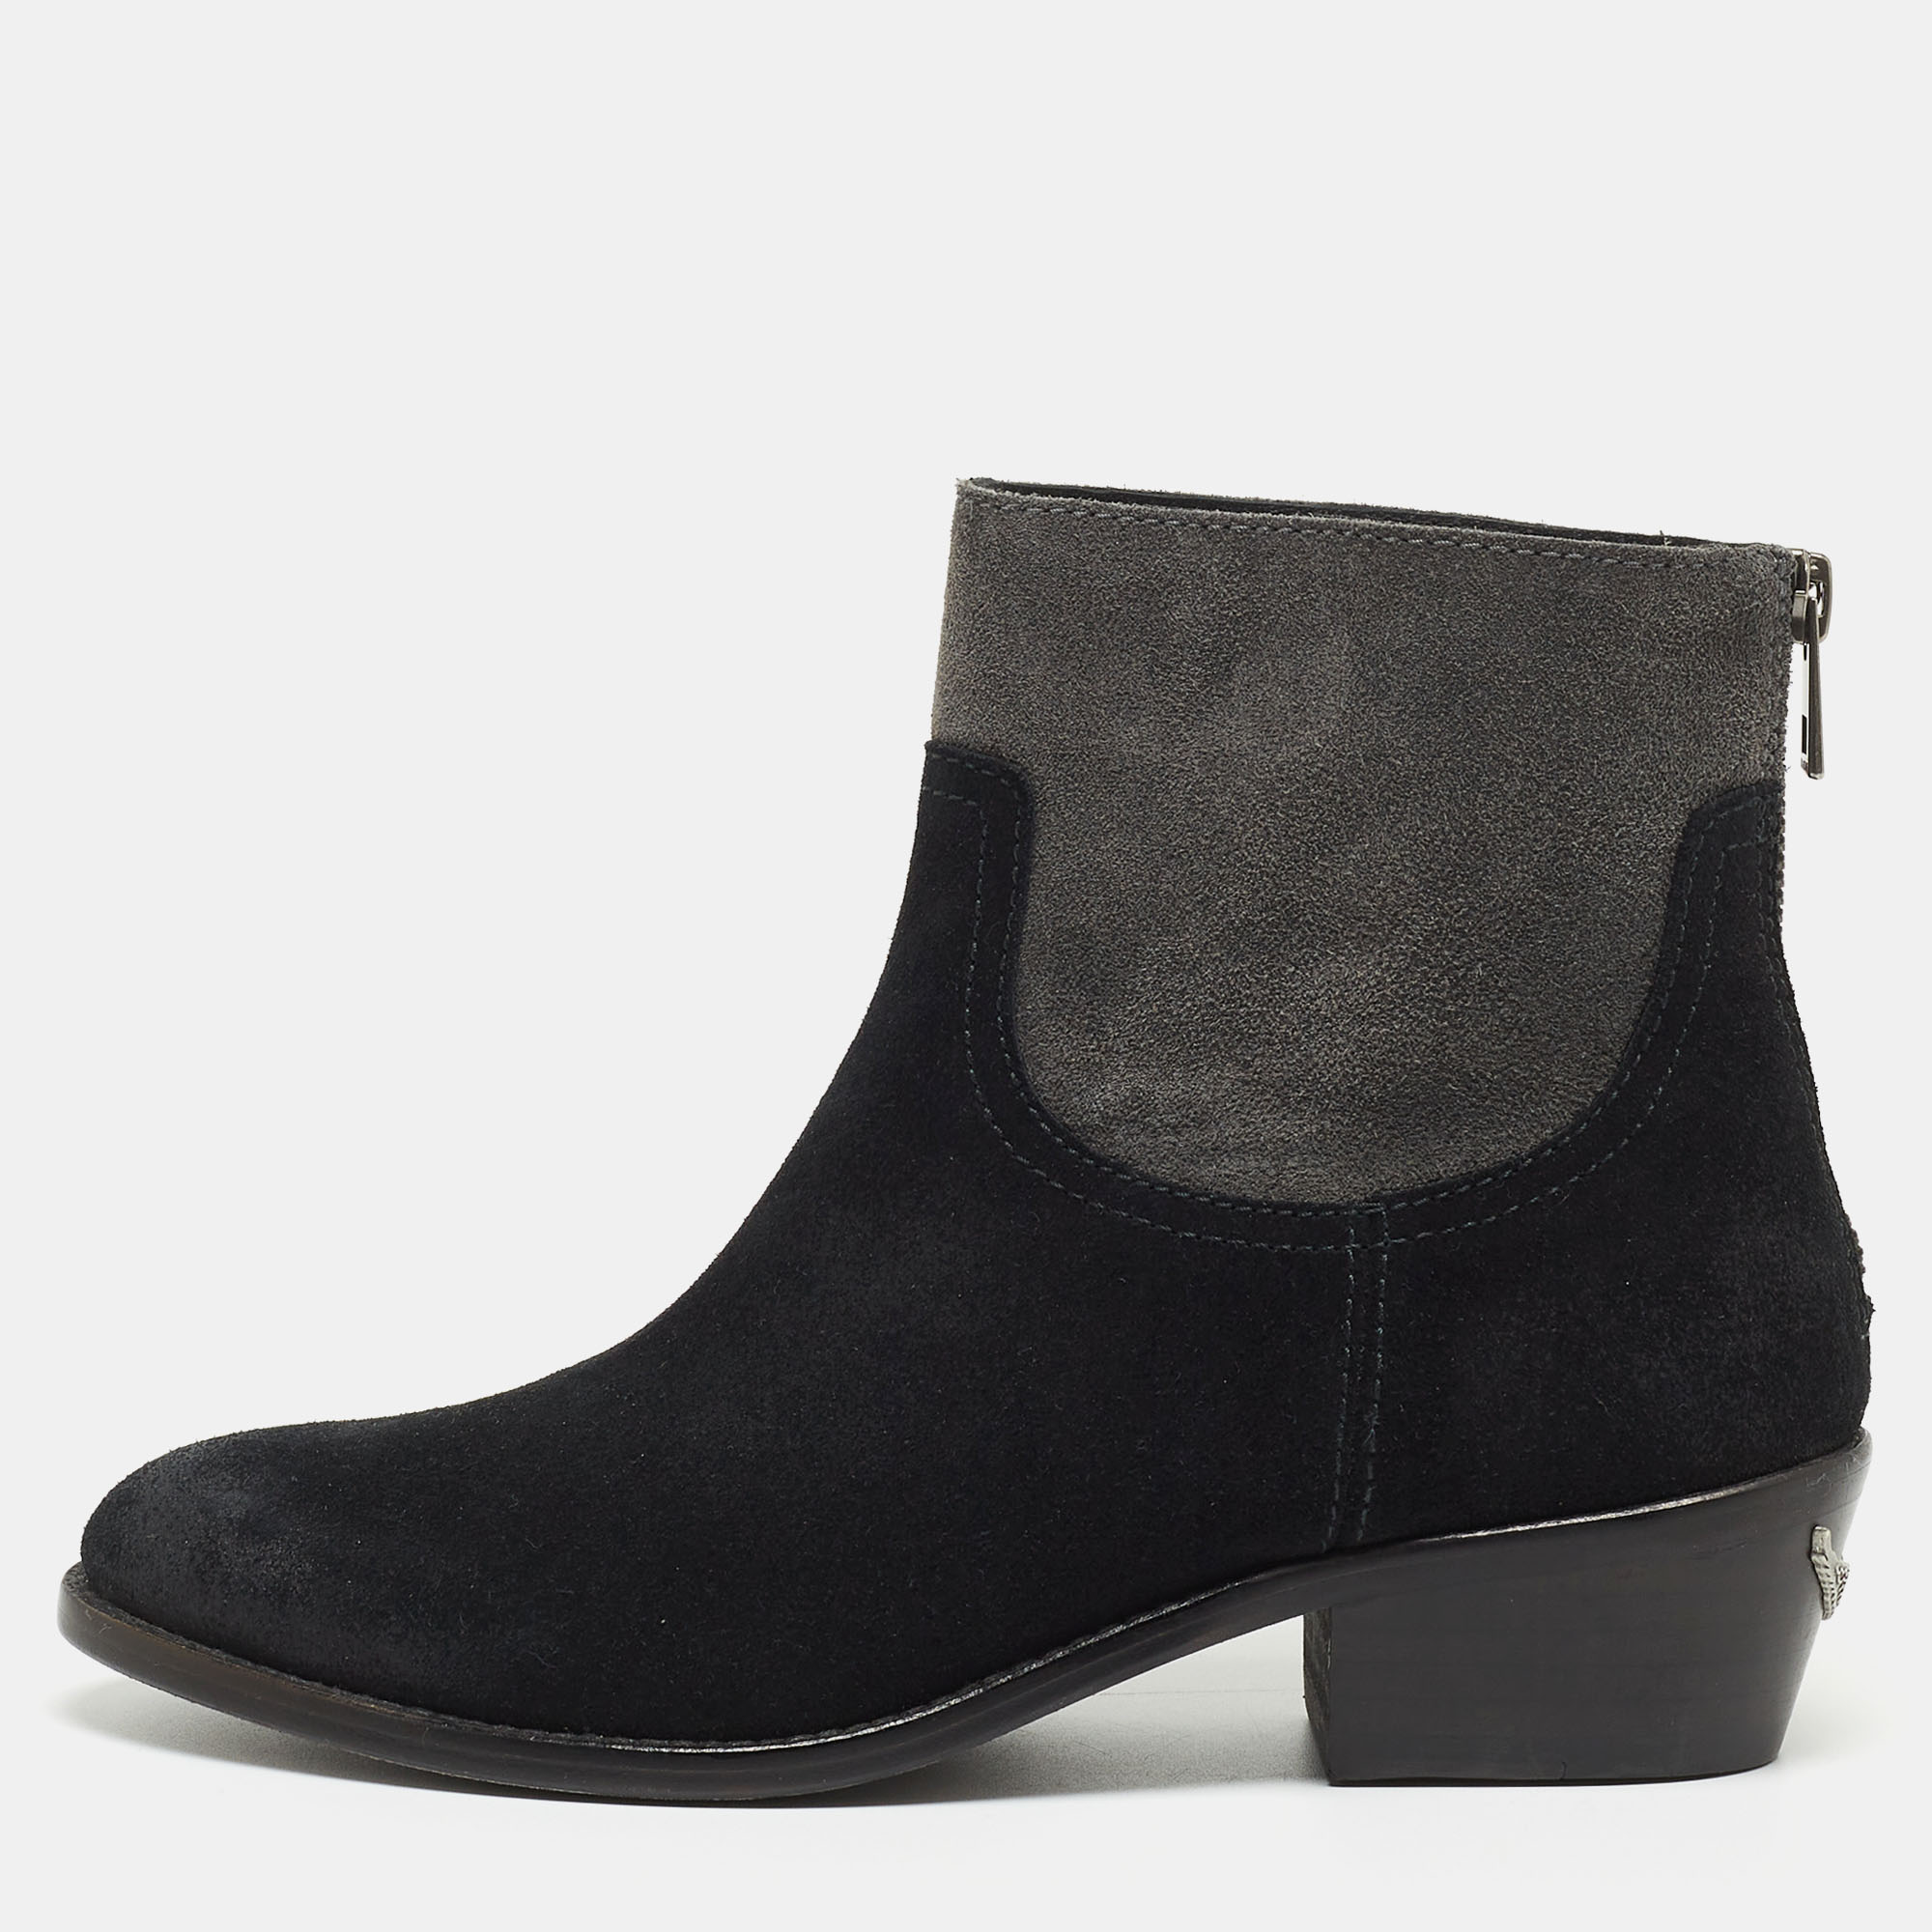 Zadig & voltaire black/grey suede ankle boots size 36